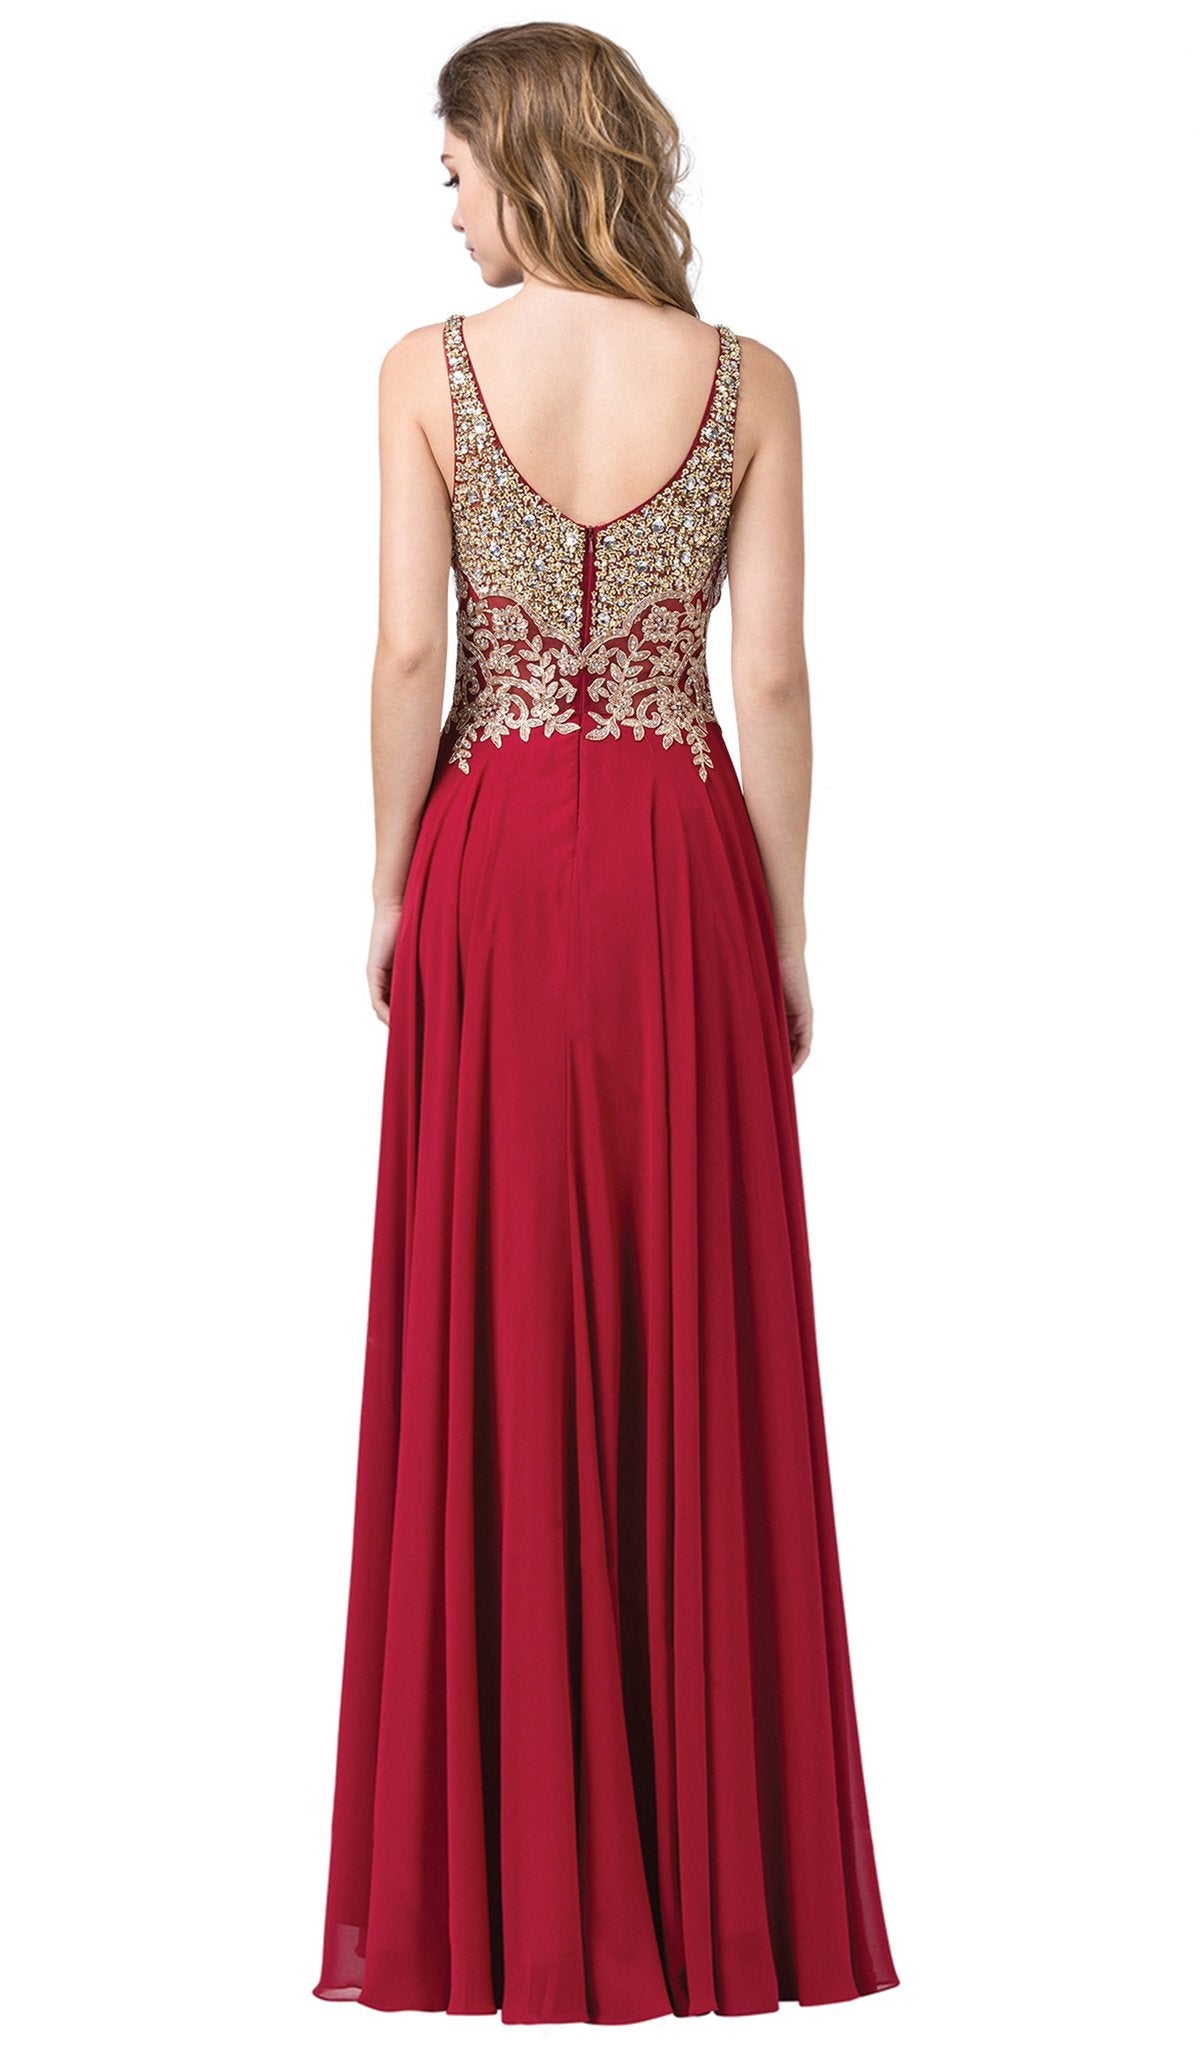 Dancing Queen - 2494 Jewel Encrusted Bodice A-Line Chiffon Gown In Red